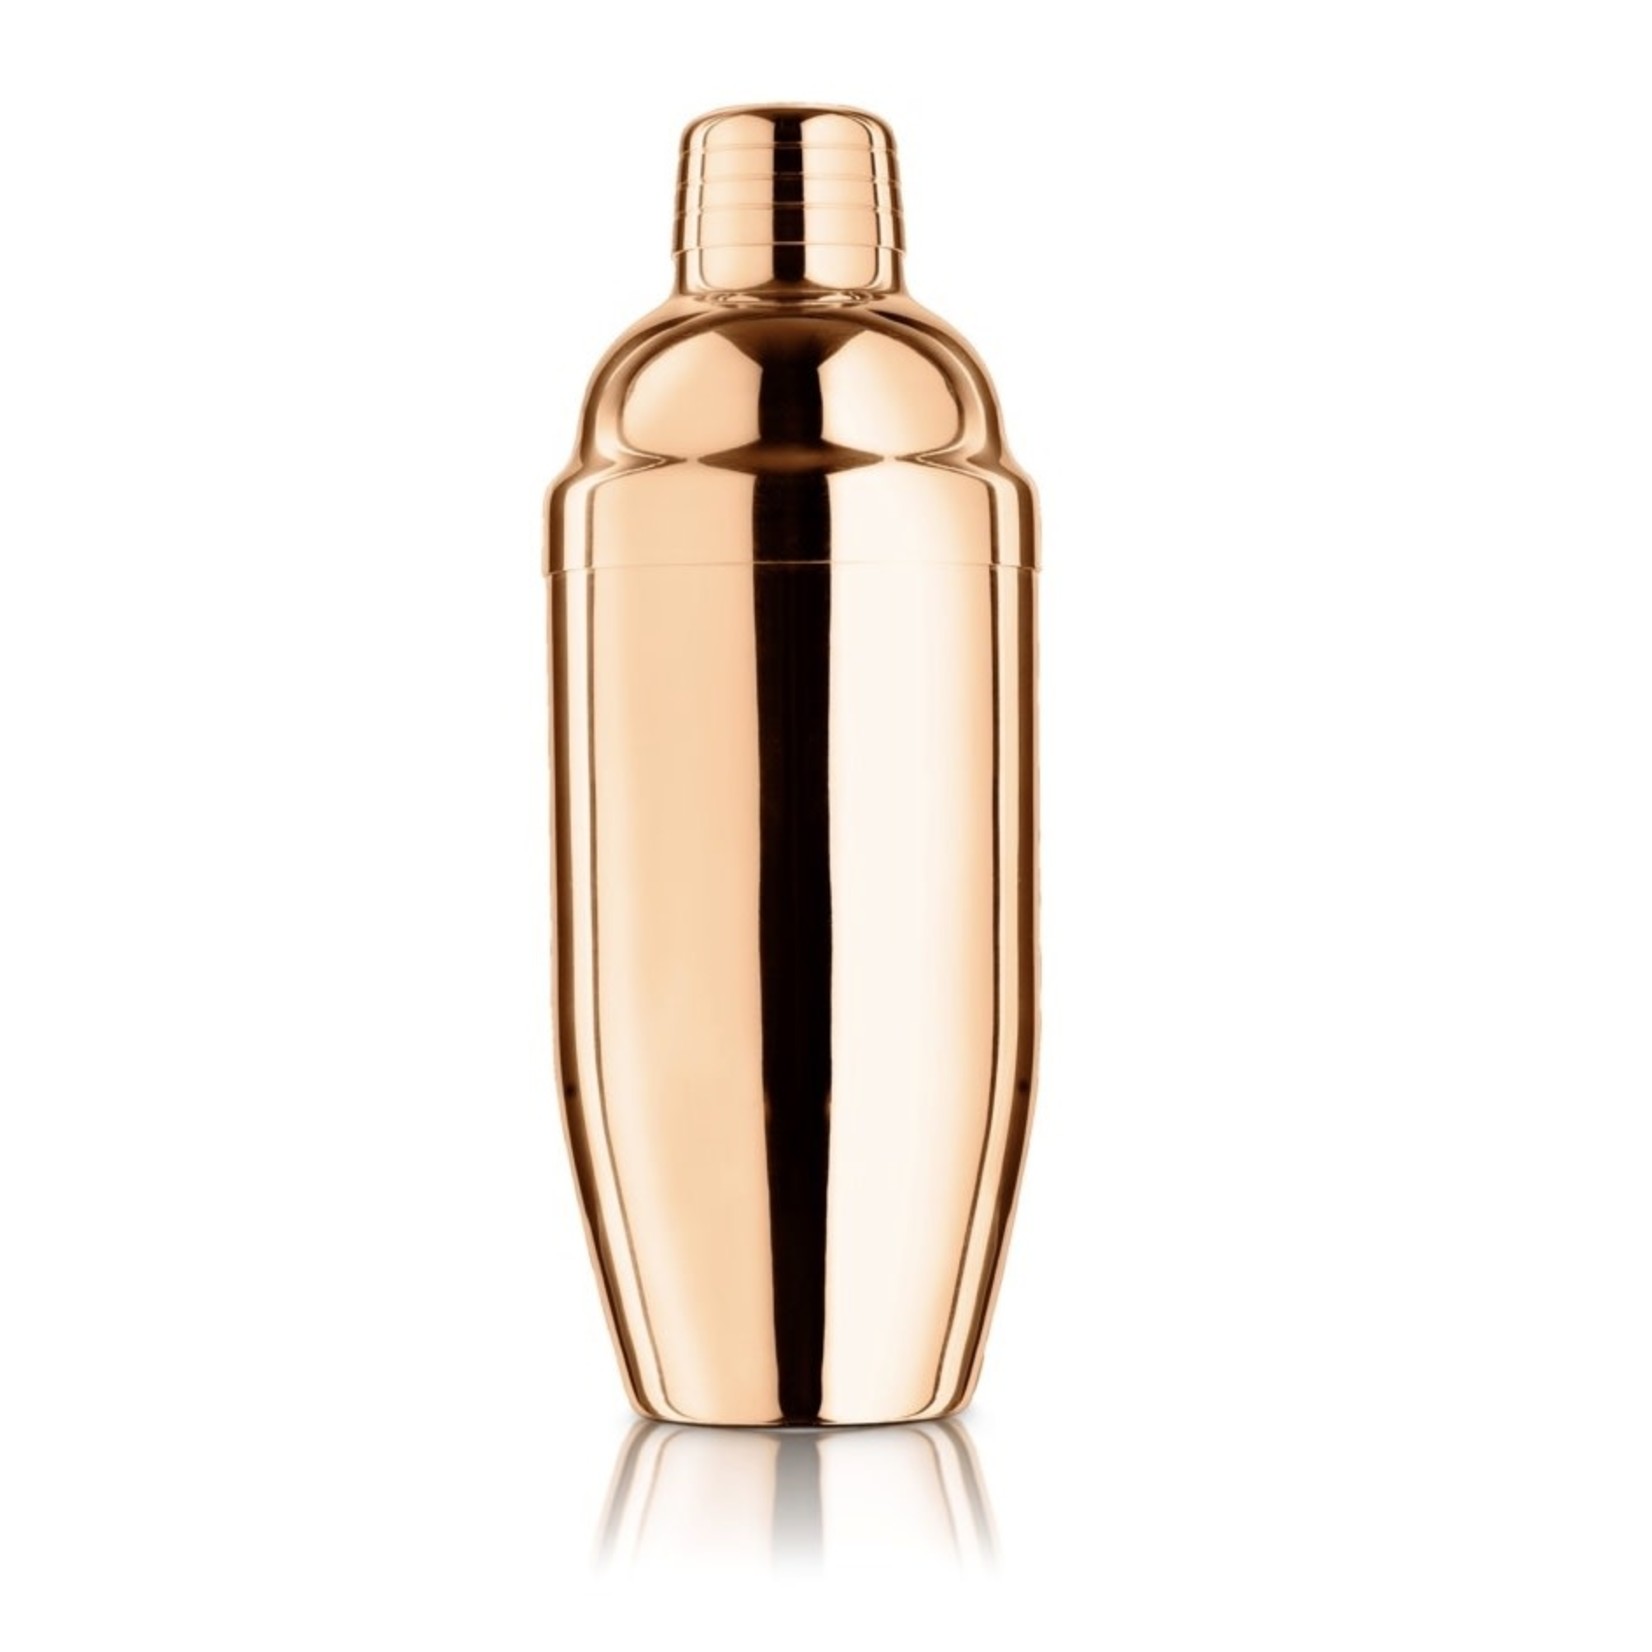 FINAL TOUCH FINAL TOUCH Martini Double Wall Stainless Steel Shaker - Copper